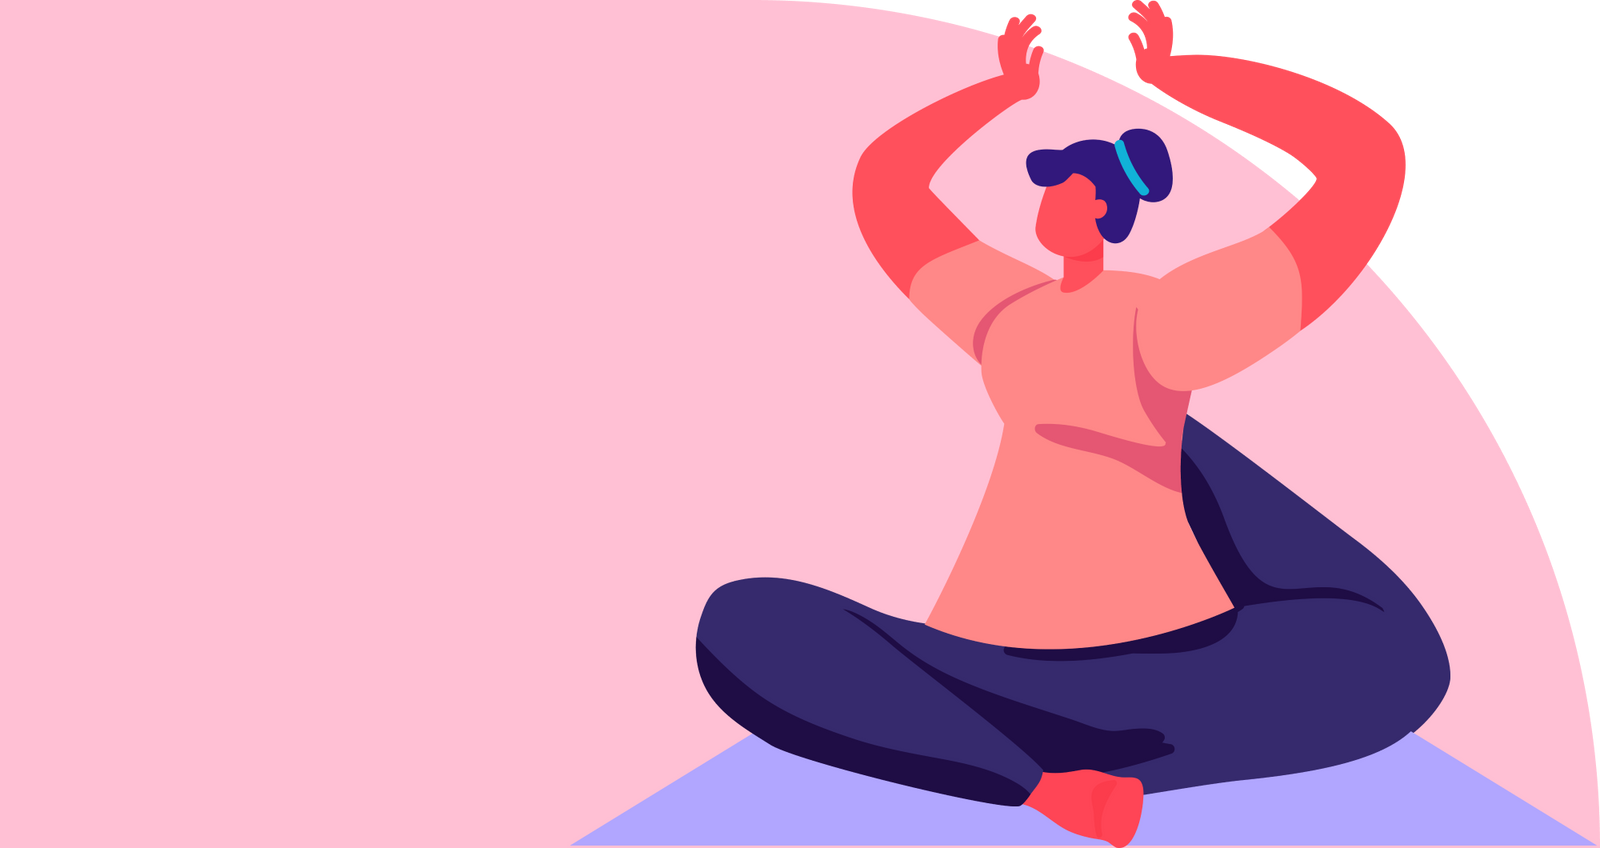 Yoga Poses That Can Help Reduce Back Cramps During Periods